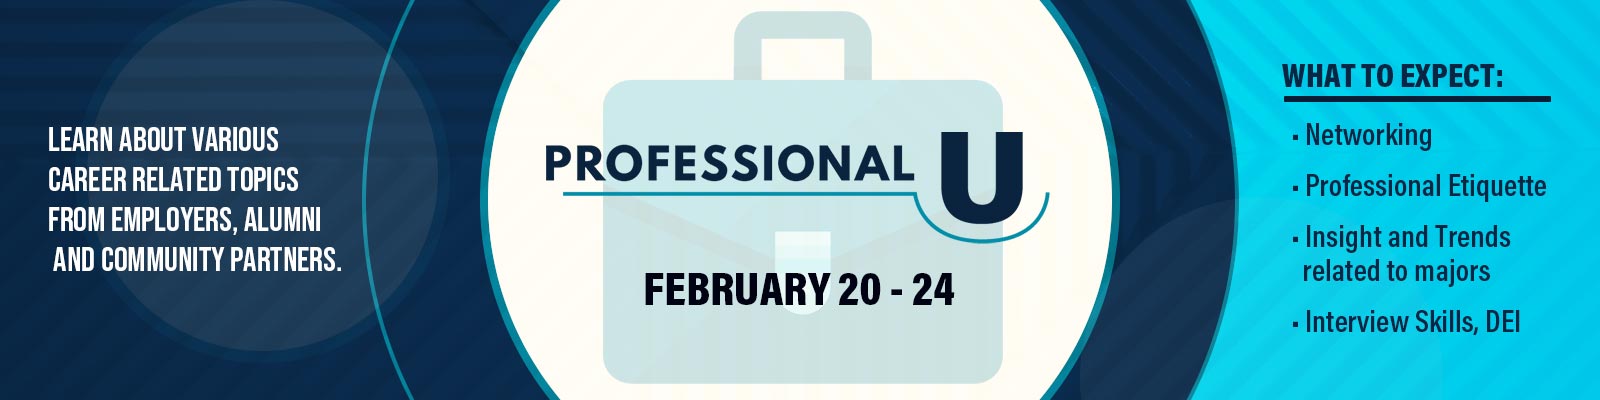 Professional U - February 20 through 24. Learn about various career-related topics from employers, alumni, and community partners. Expect networking, professional etiquette, insight and trends related to majors, interview skills, and DEI.